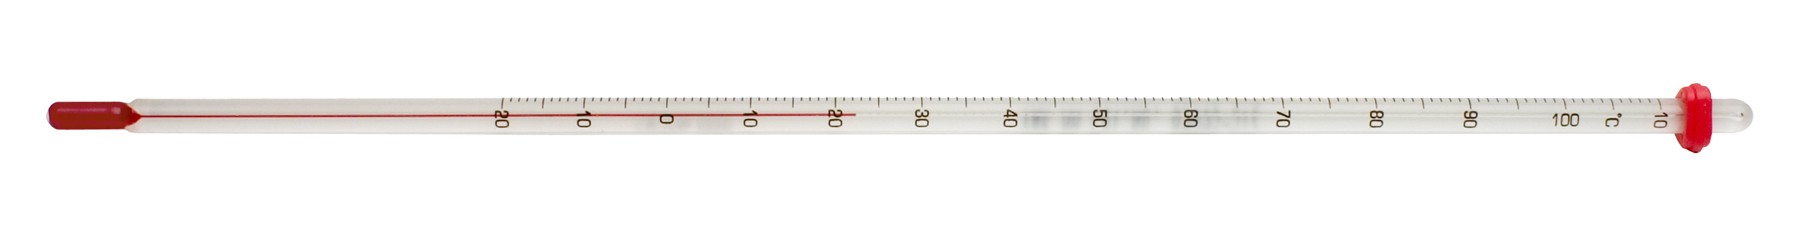 H-B Instrument Durac Hot Water/Refrigerant Line Thermometers